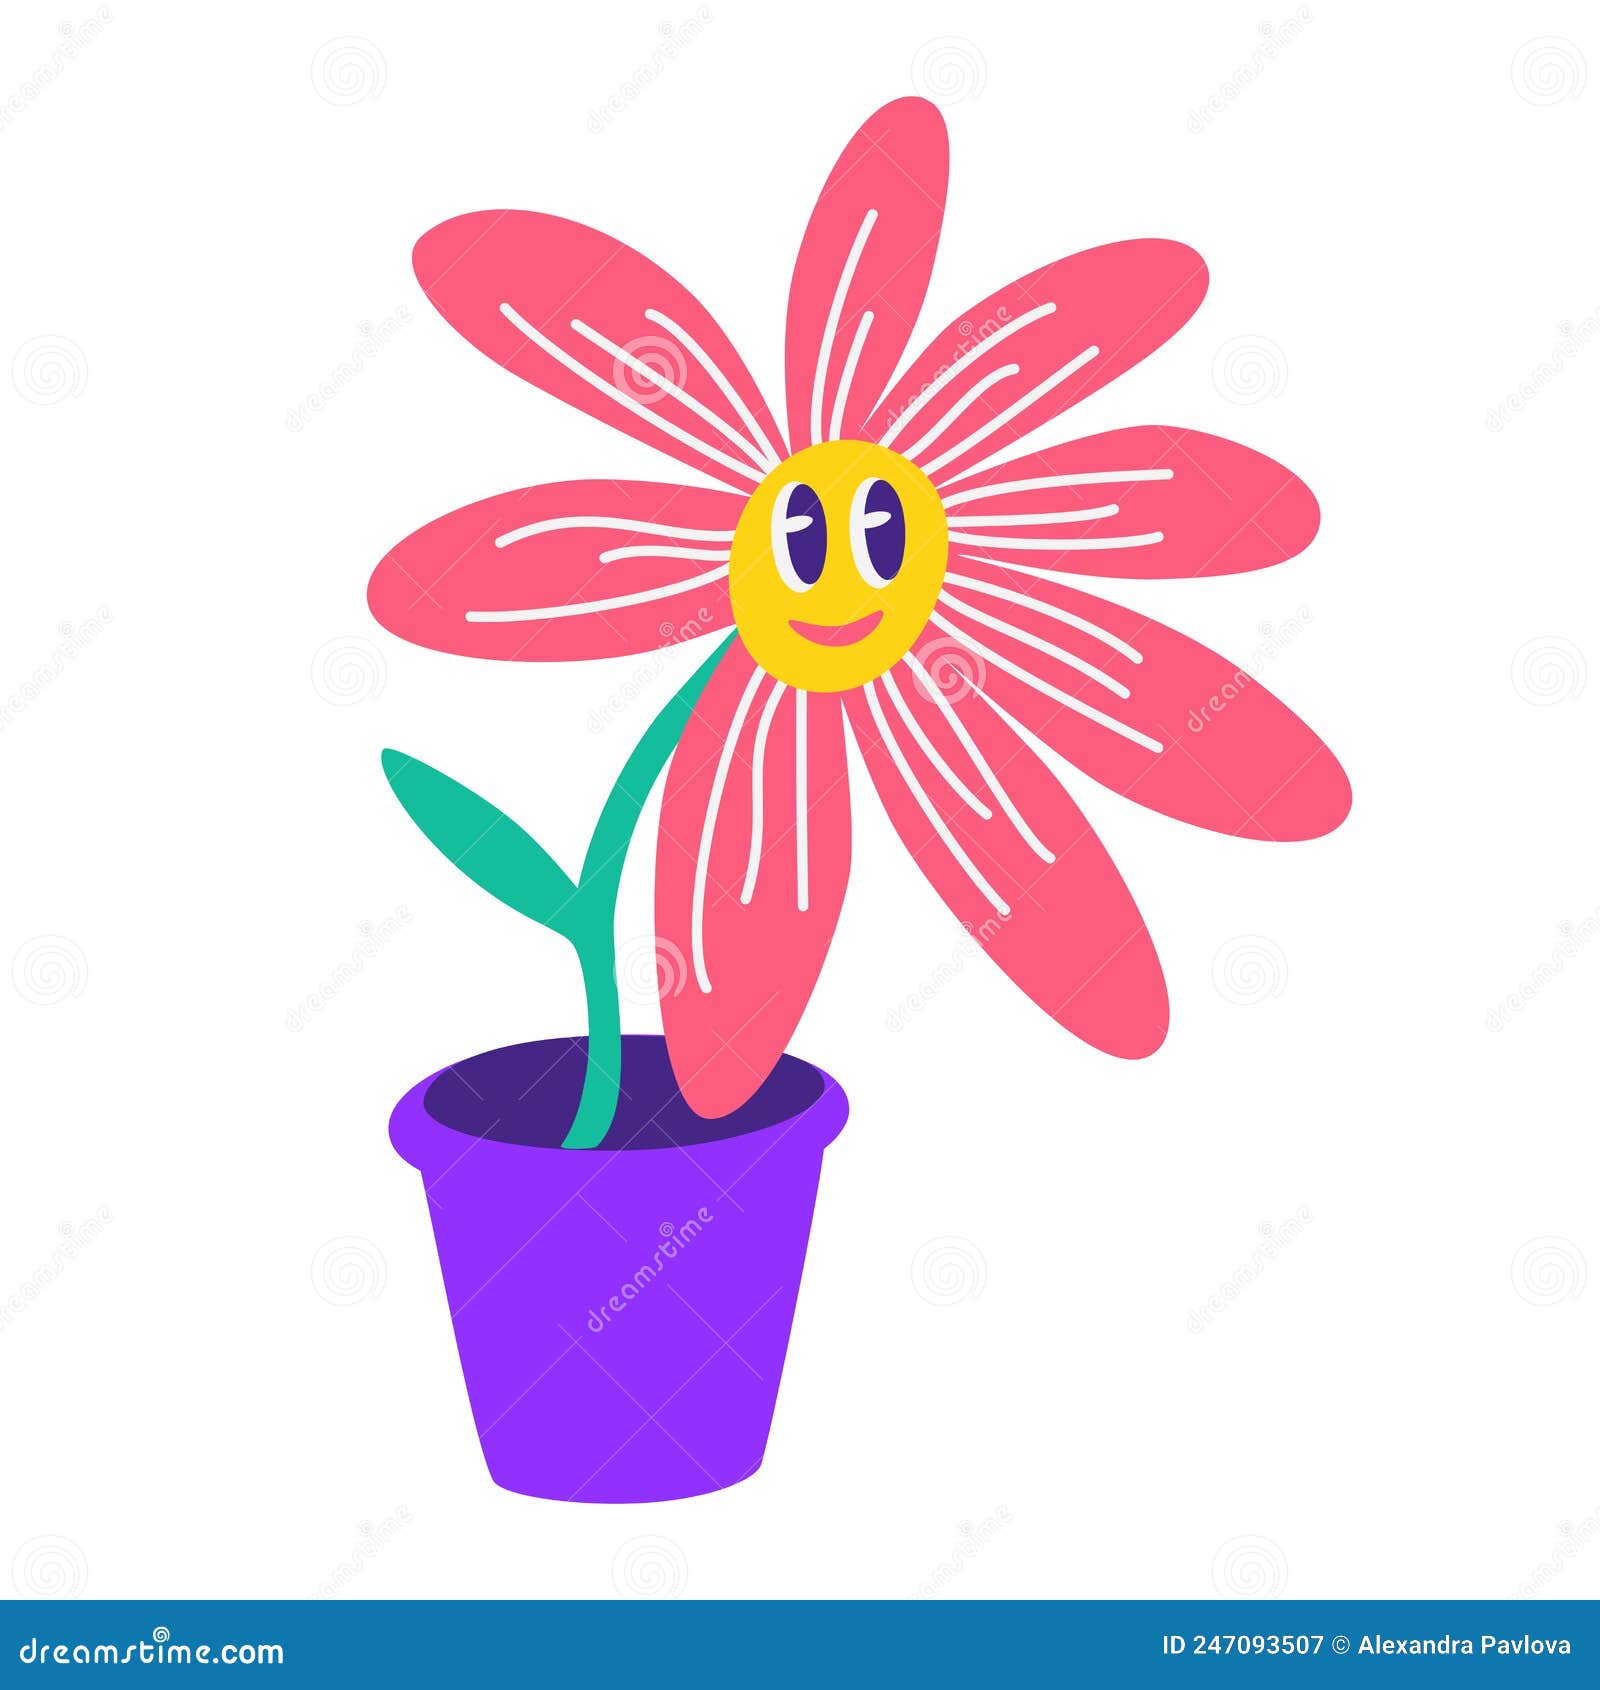 Flower with a smile smiley face daisy Royalty Free Vector